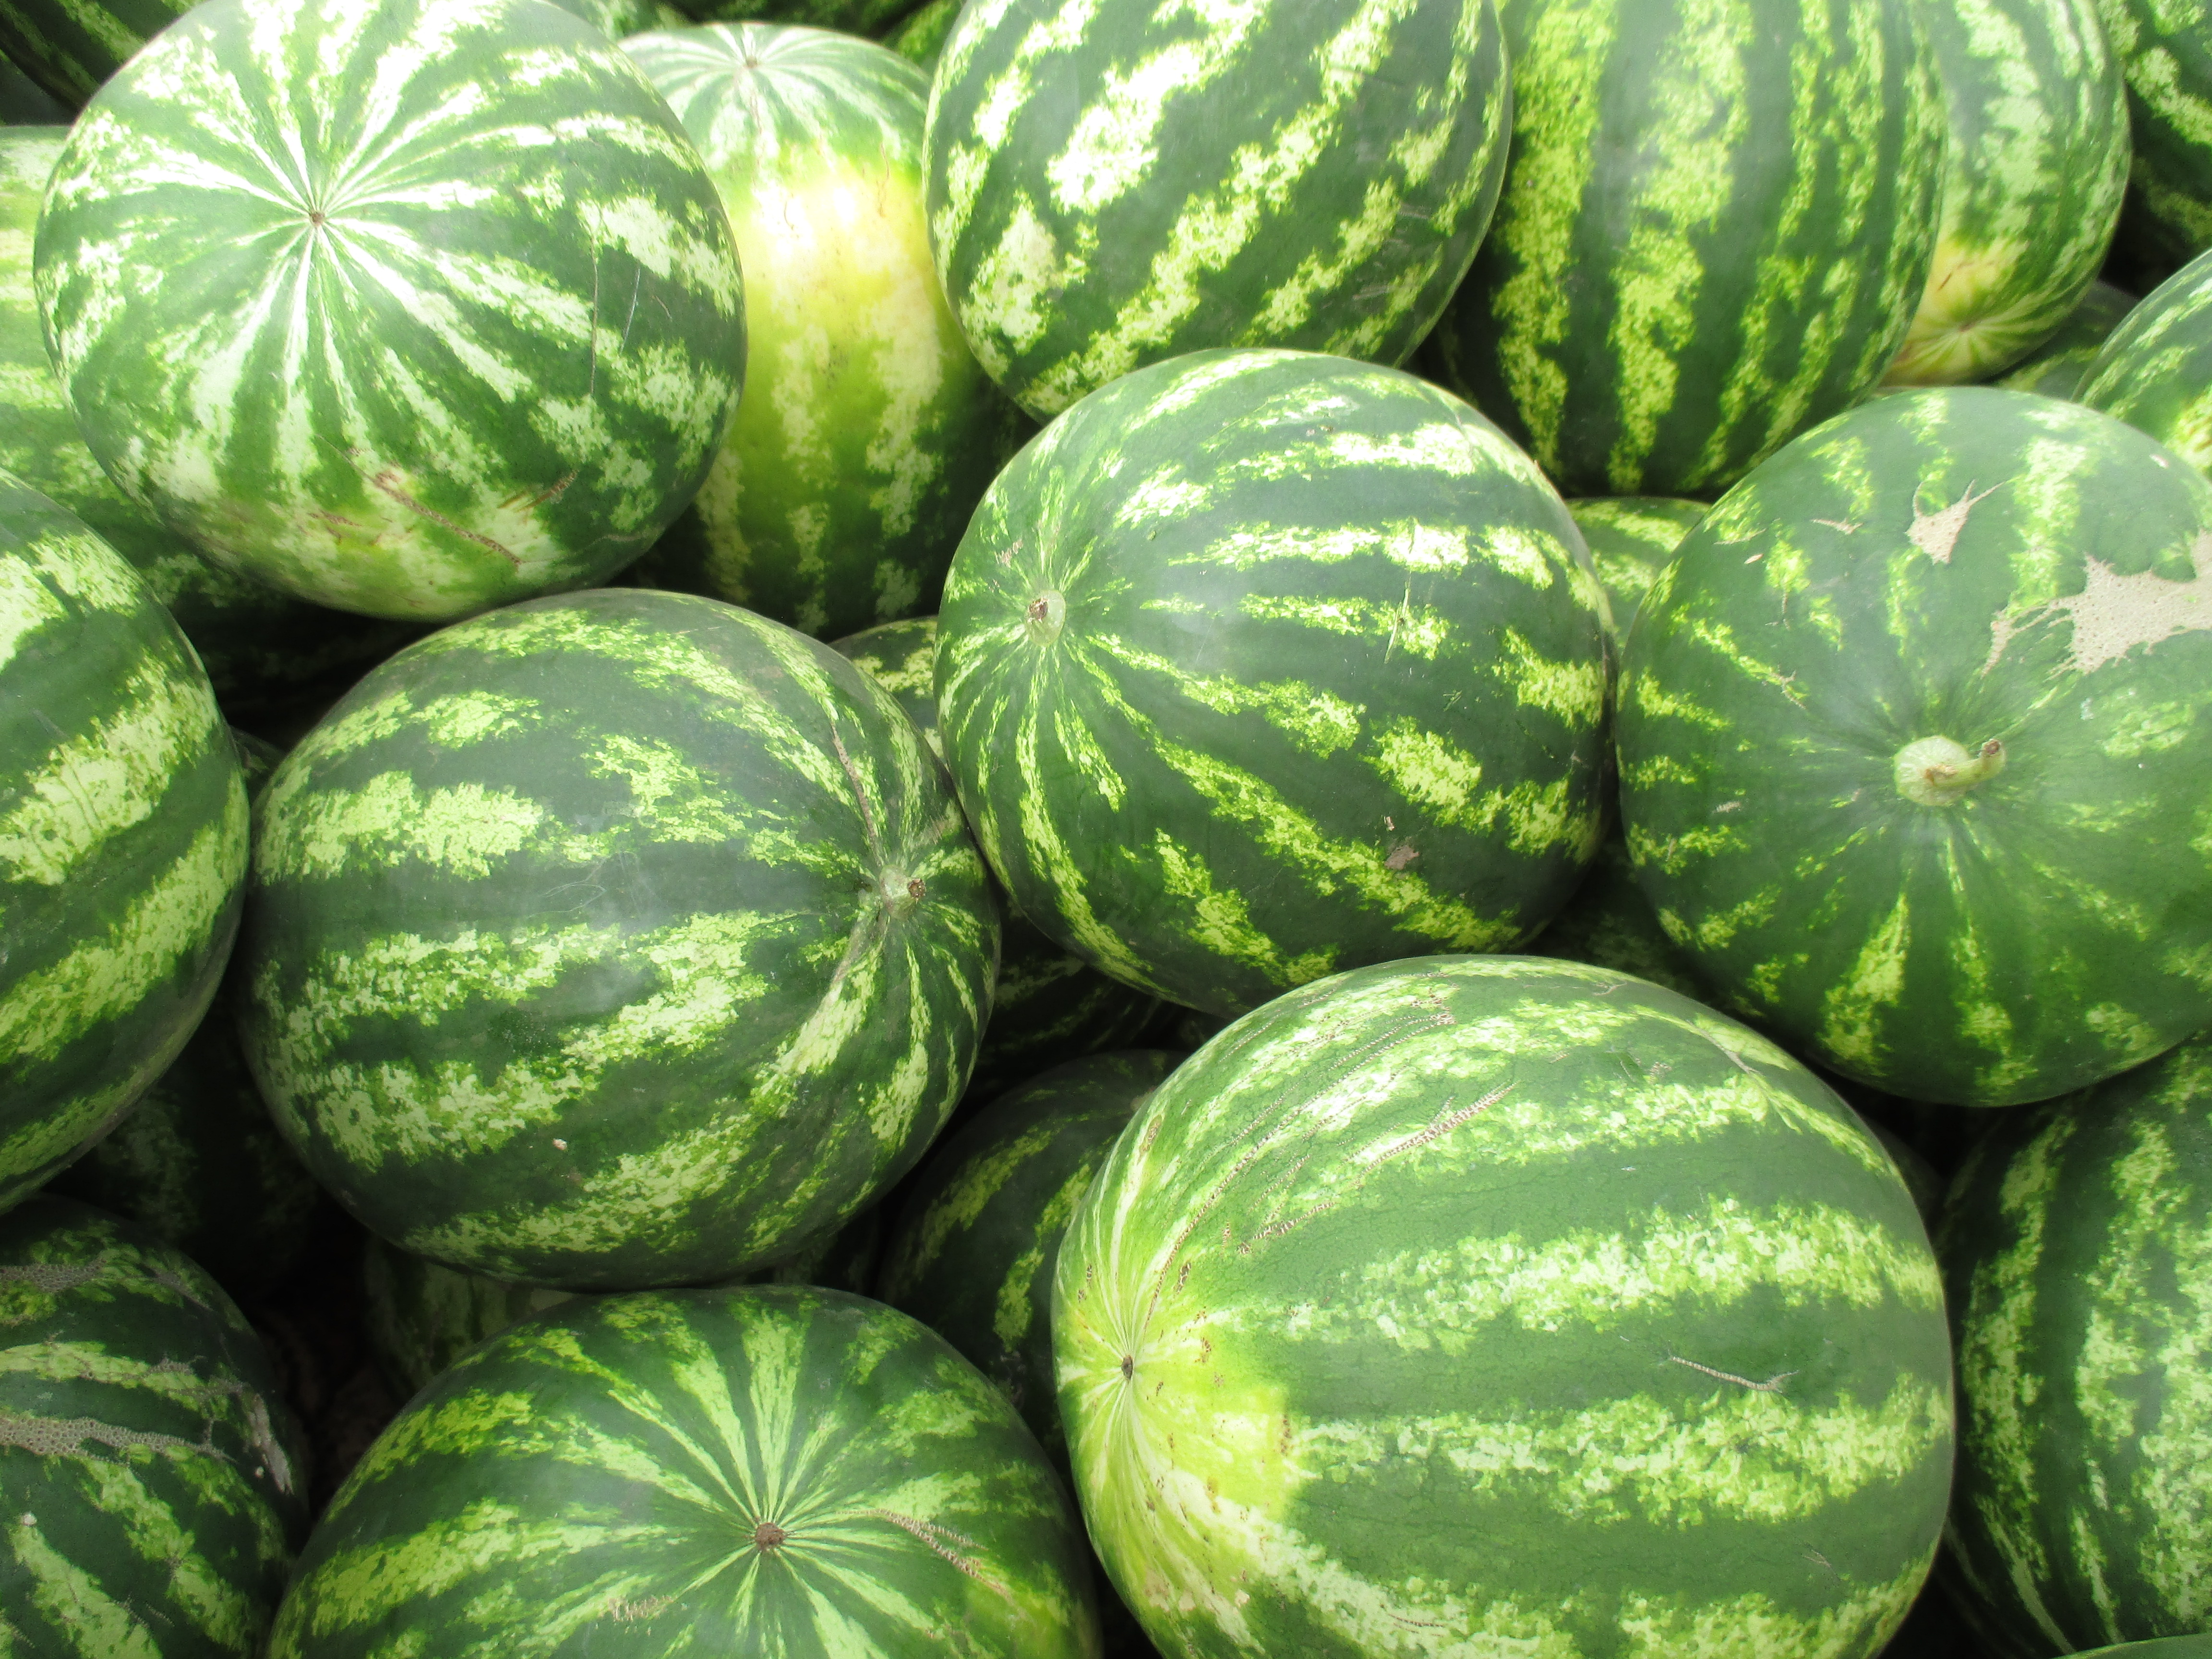 Lots of watermelons.